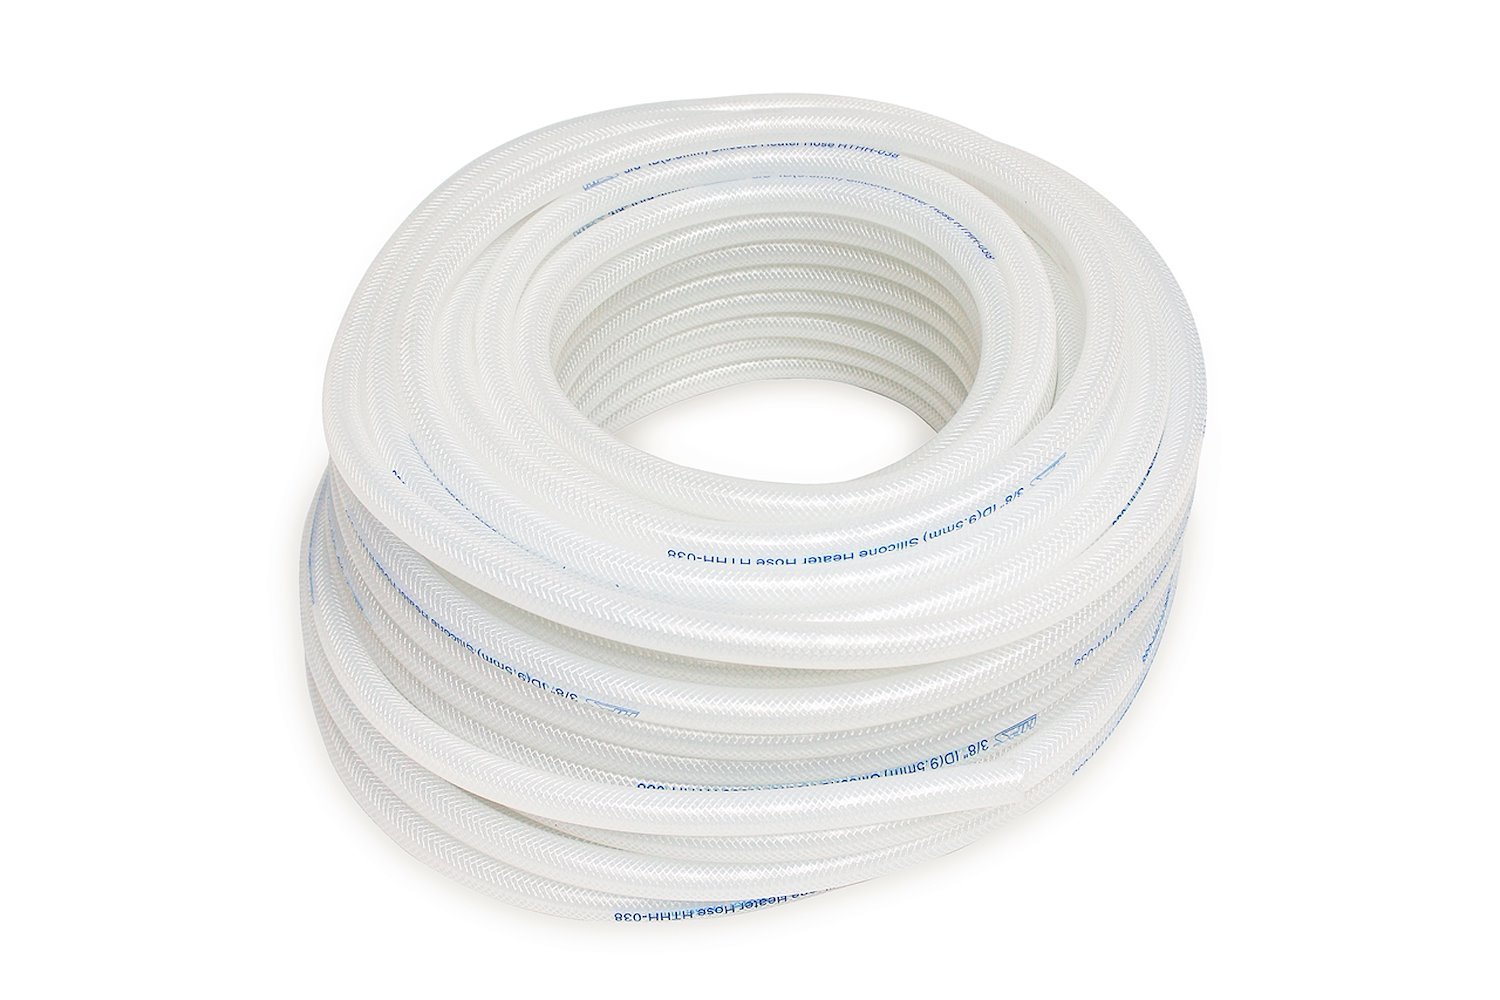 HTHH-050-CLEARx25 Silicone Heater Hose Tubing, High-Temp Reinforced, 1/2 in. ID, 25 ft. Roll, Clear